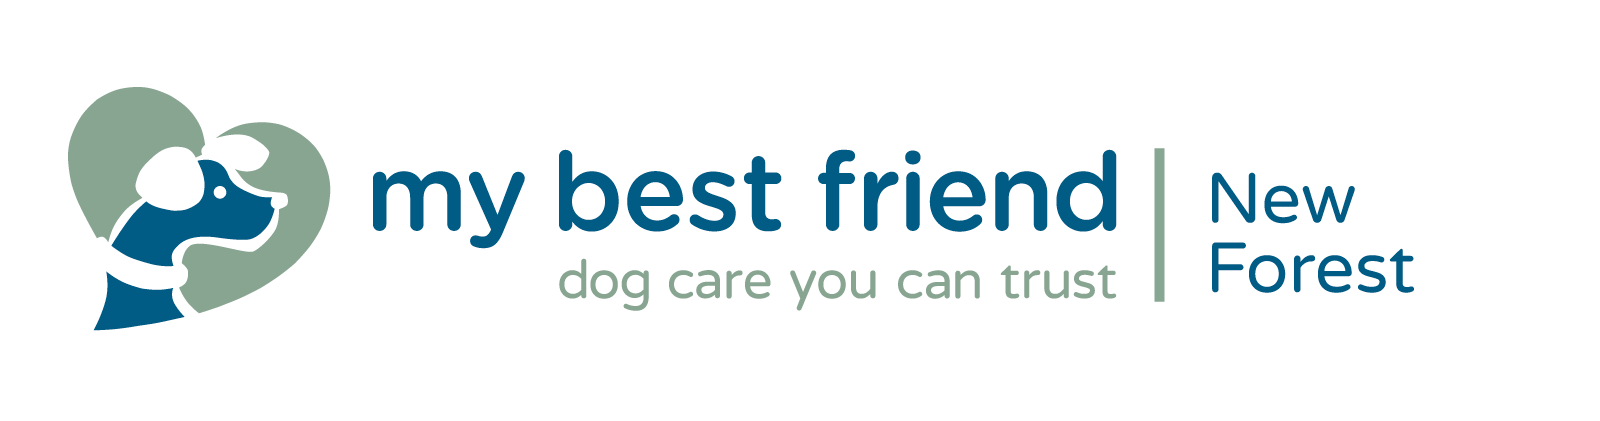 My Best Friend Dog Care The New Forest